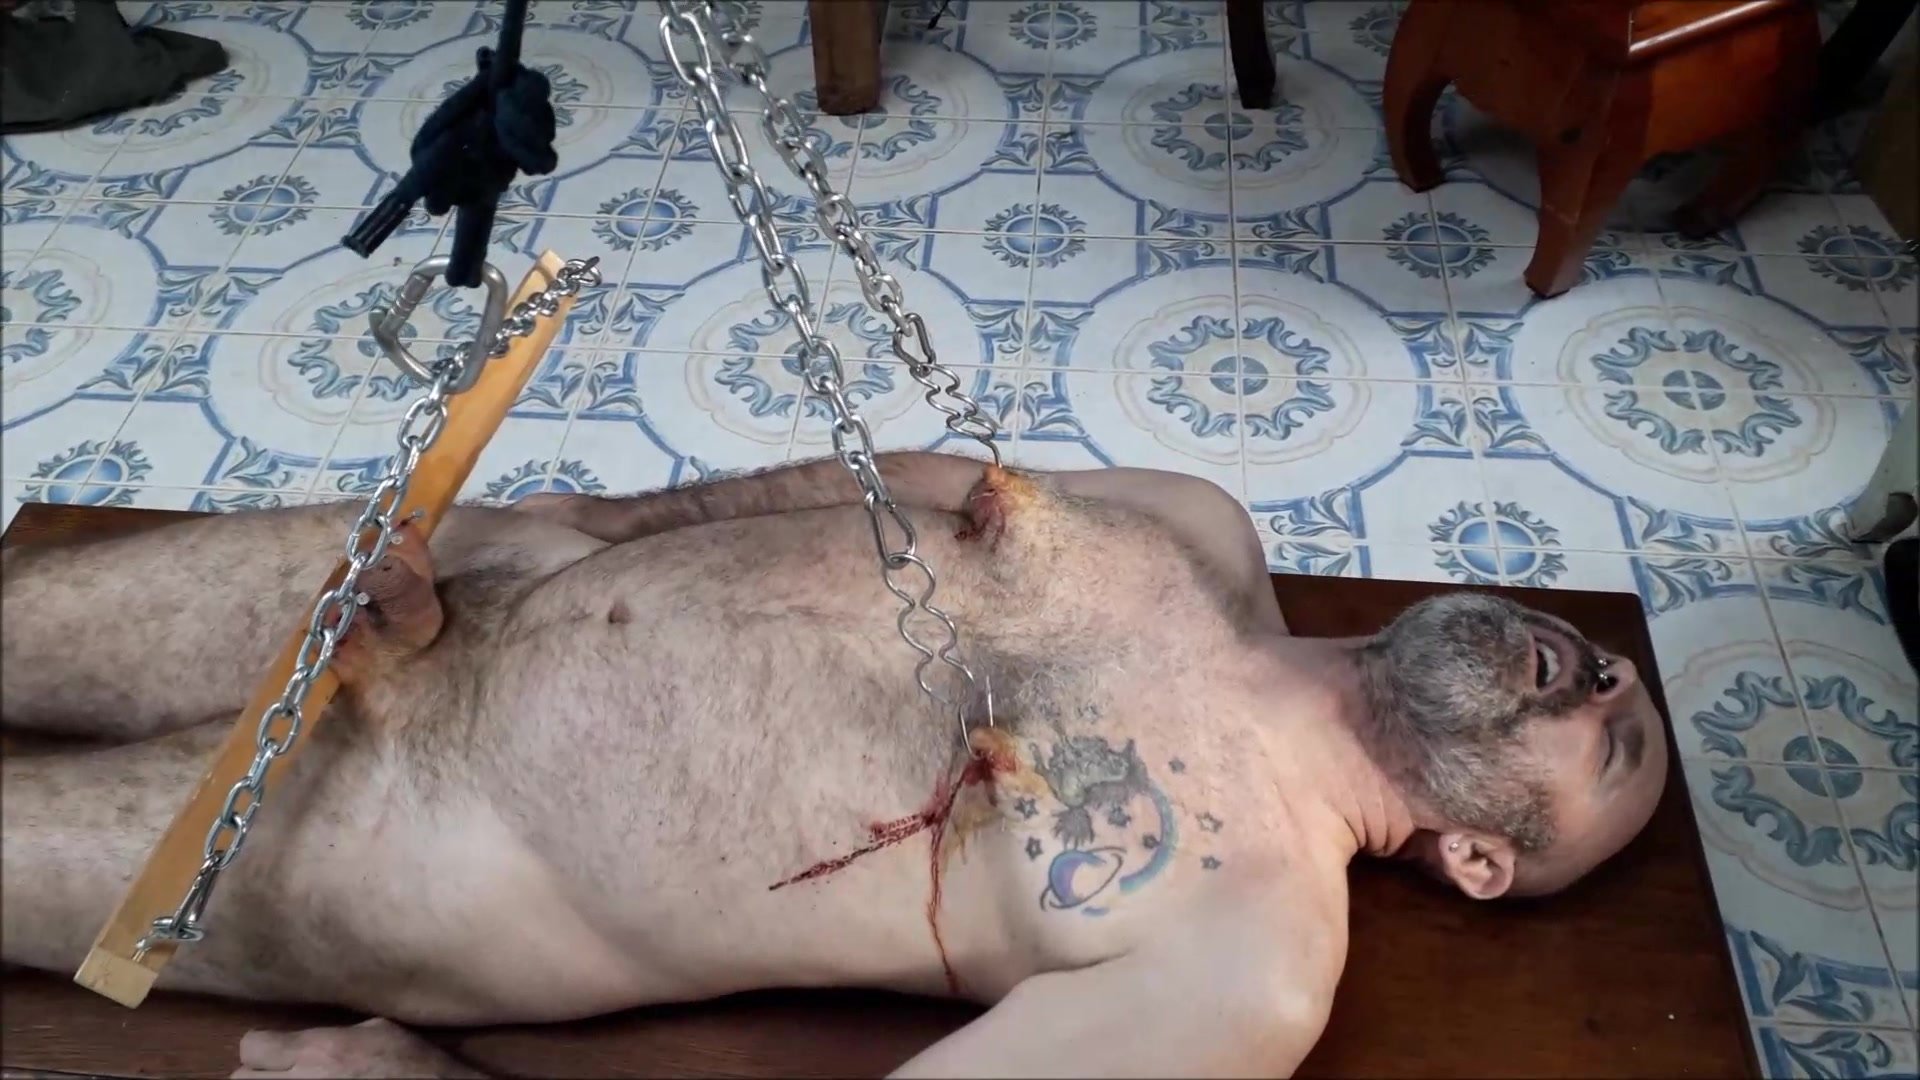 Slave is suspended by nipples and scrotum and tortured with electricity